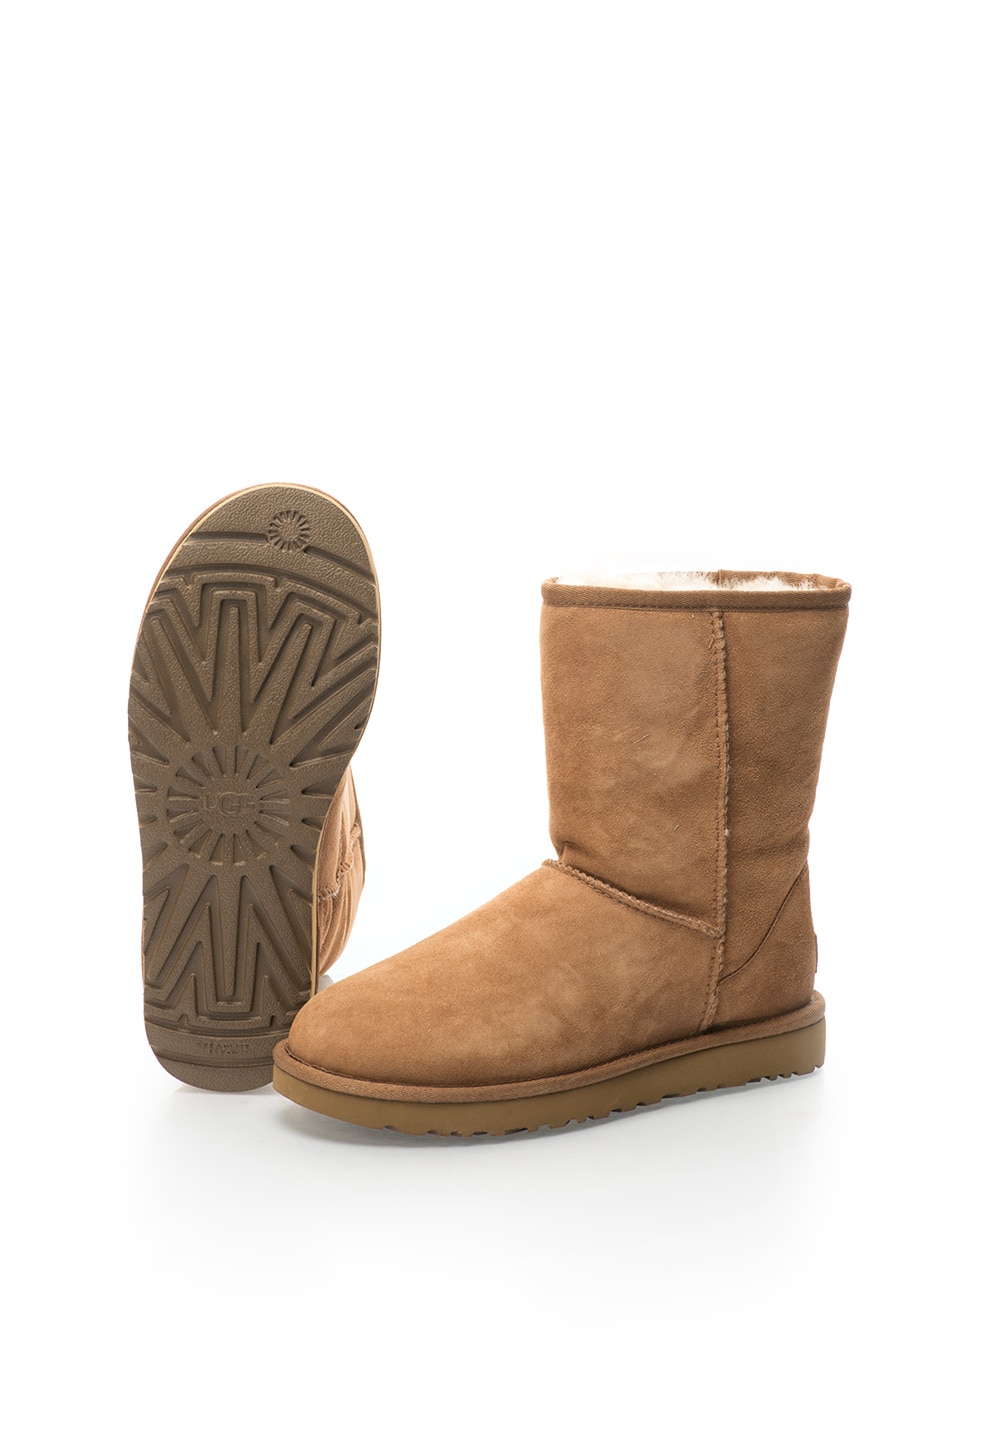 atmosphere Brother direction UGG, Cizme scurte din piele intoarsa Classic, Maro, 5 - eMAG.ro